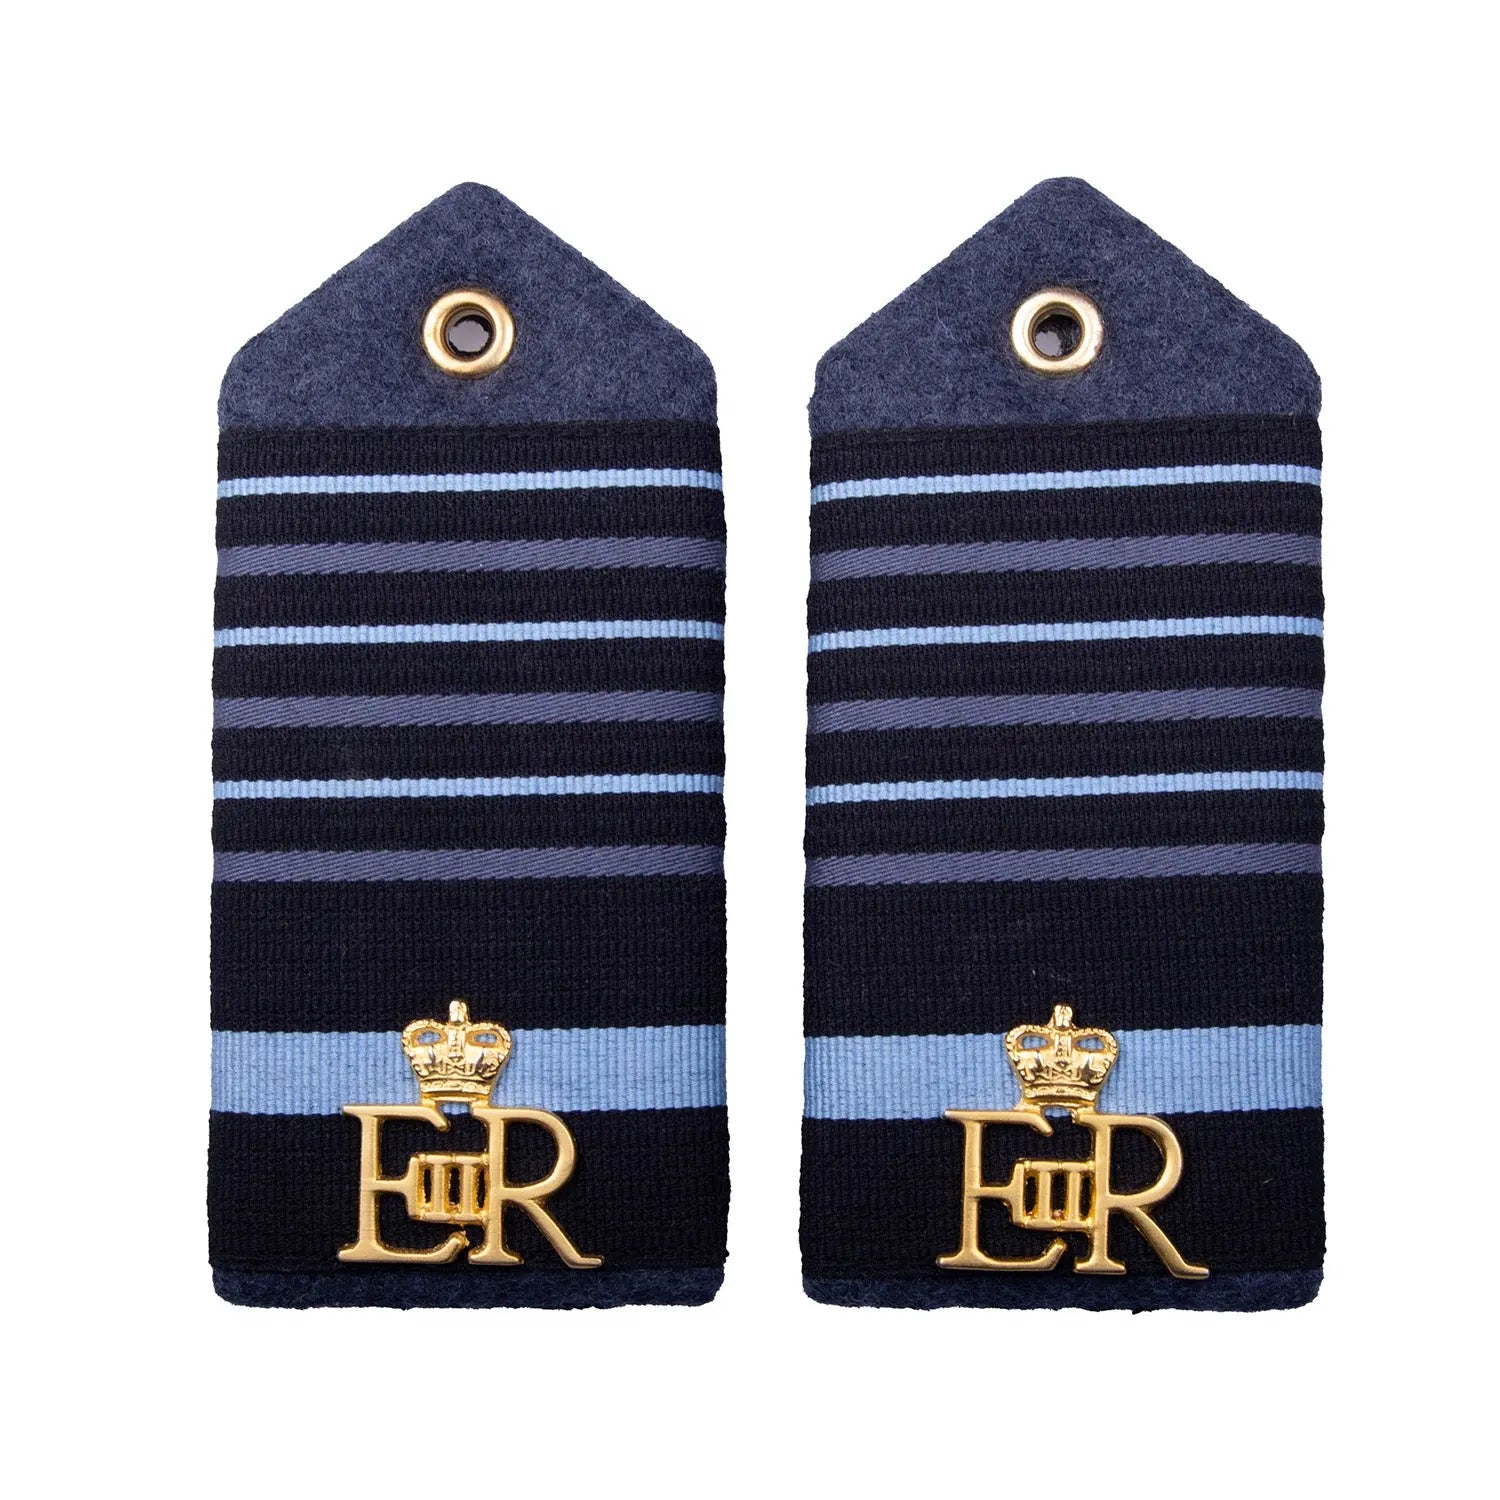 Air Chief Marshall Shoulder Board Epaulette Royal Air Force wyedean